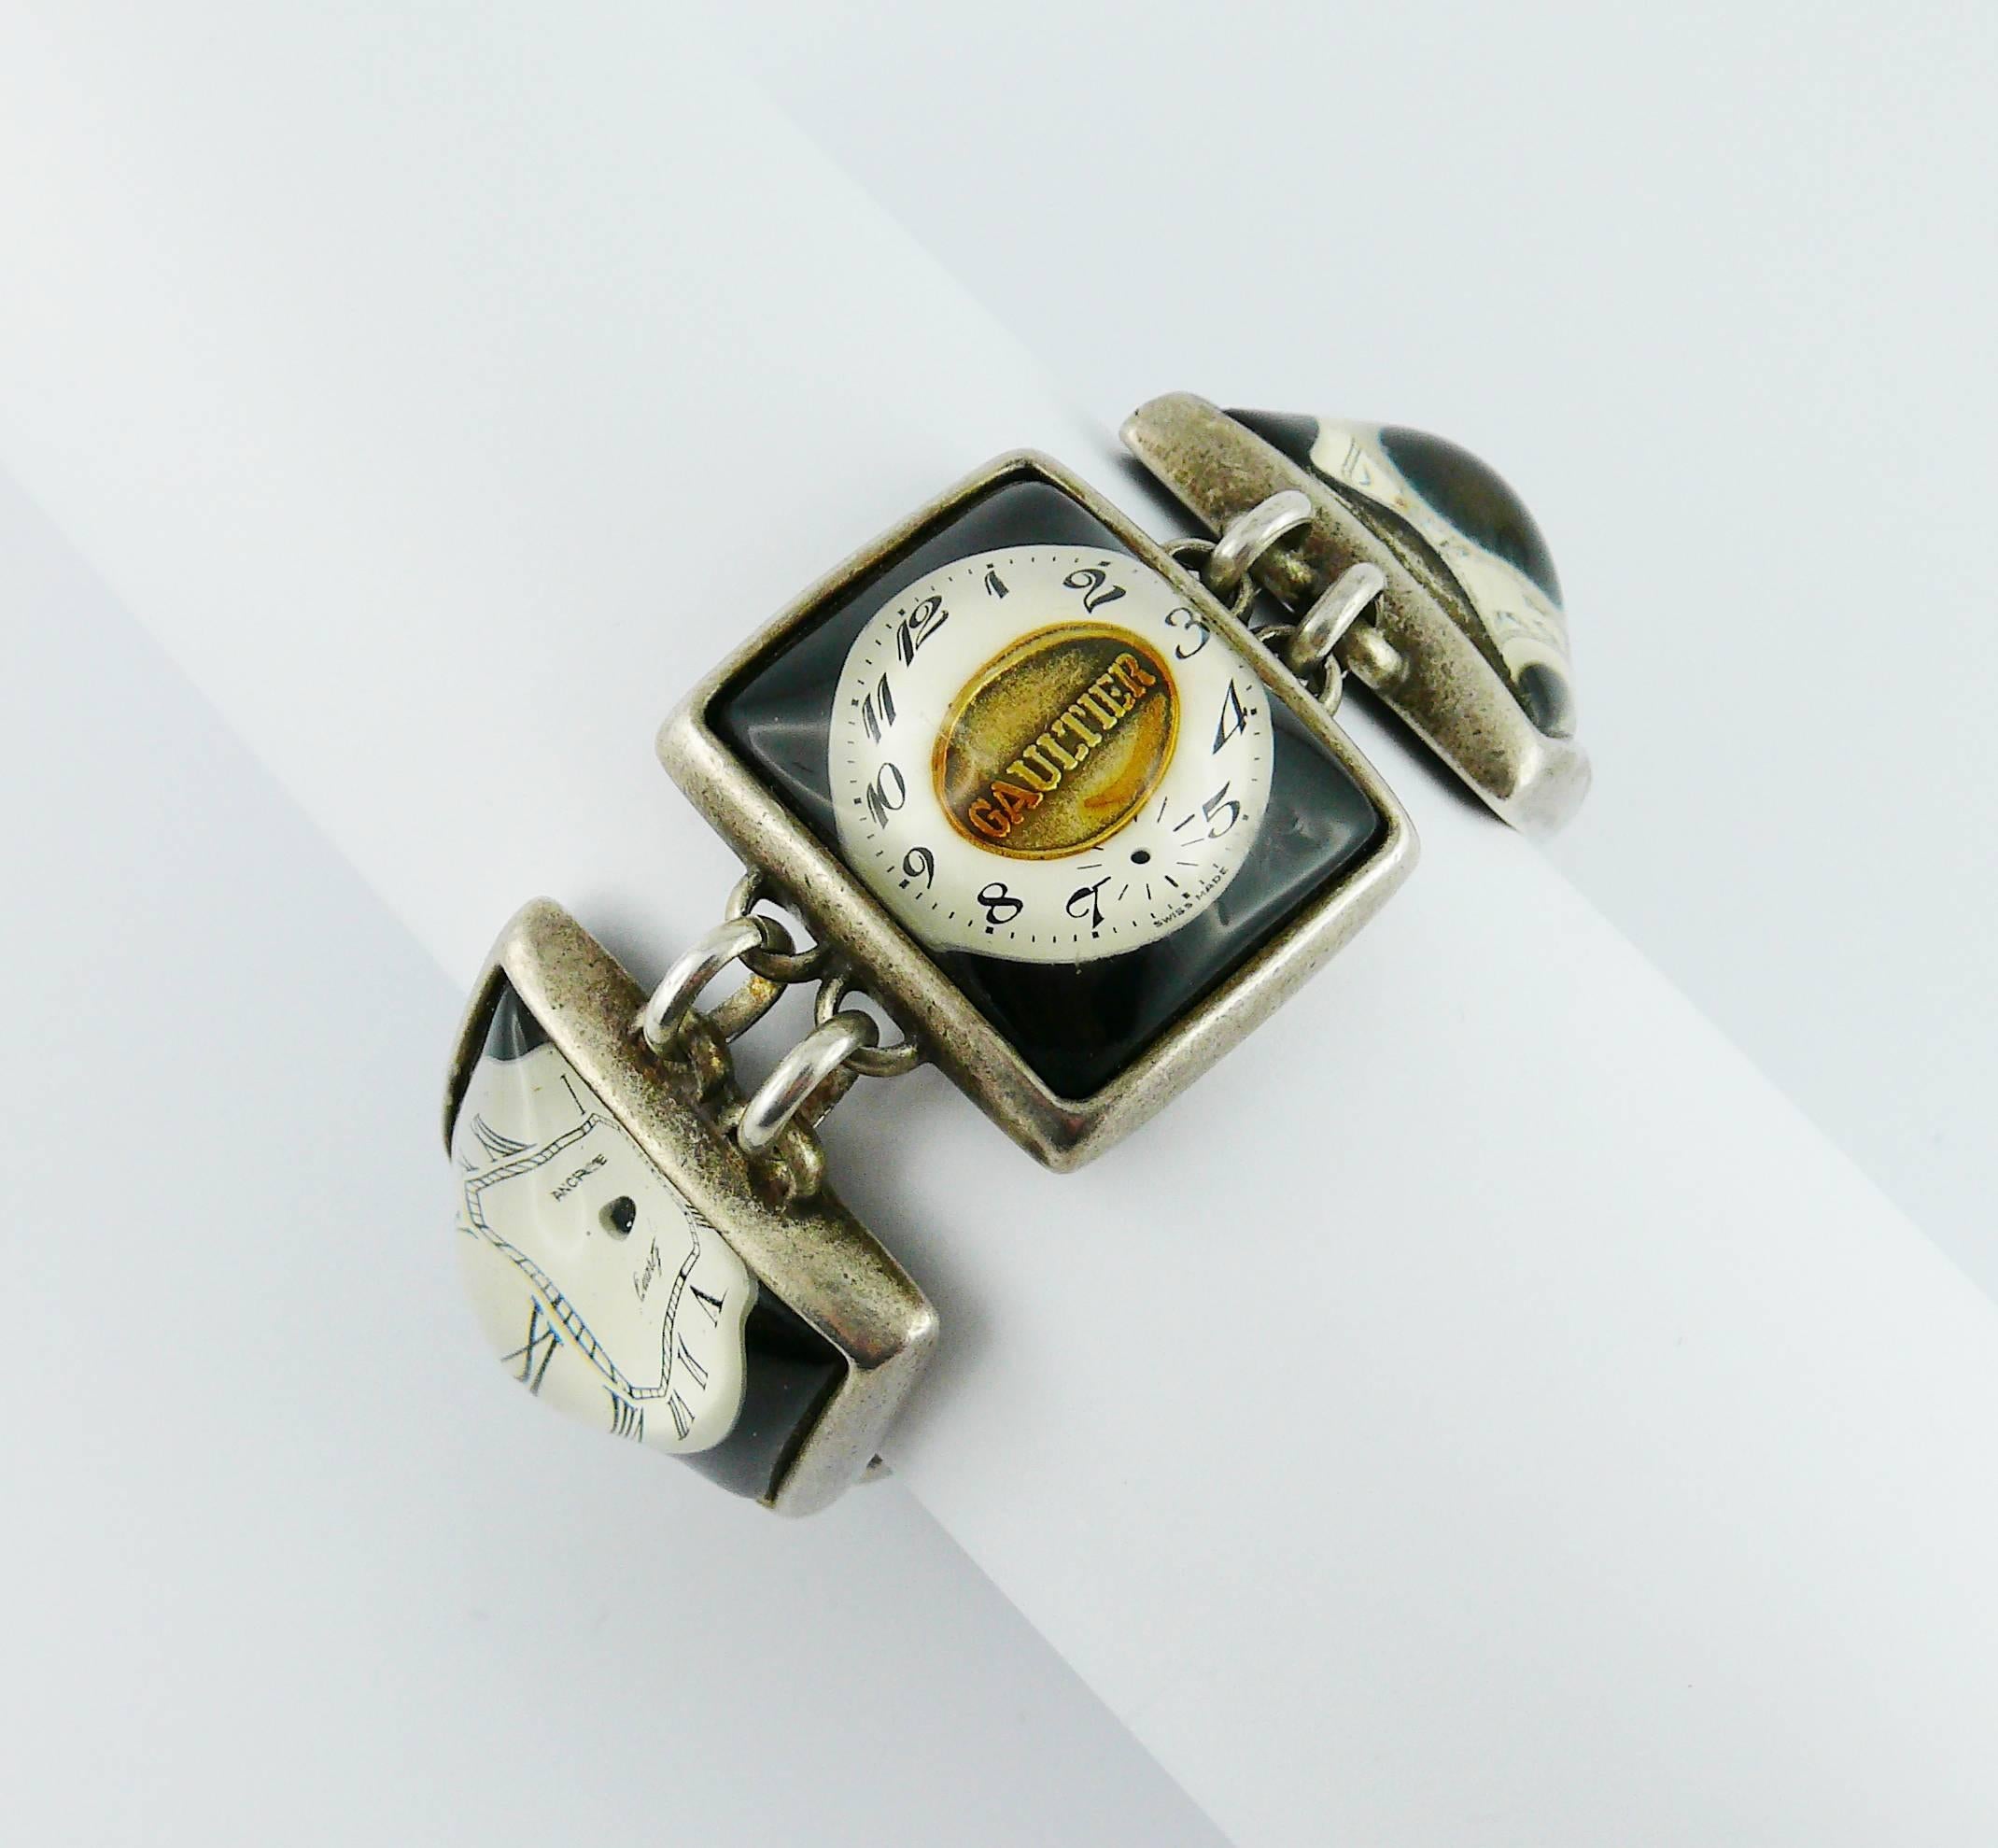 JEAN PAUL GAULTIER rare and collectable vintage watch bracelet.

Silver tone with patina links featuring rectangular watch dials in a domed clear resin inlaid.

Marked GAULTIER.

Indicative measurements : length approx. 17.7 cm (6.97 inches) / width